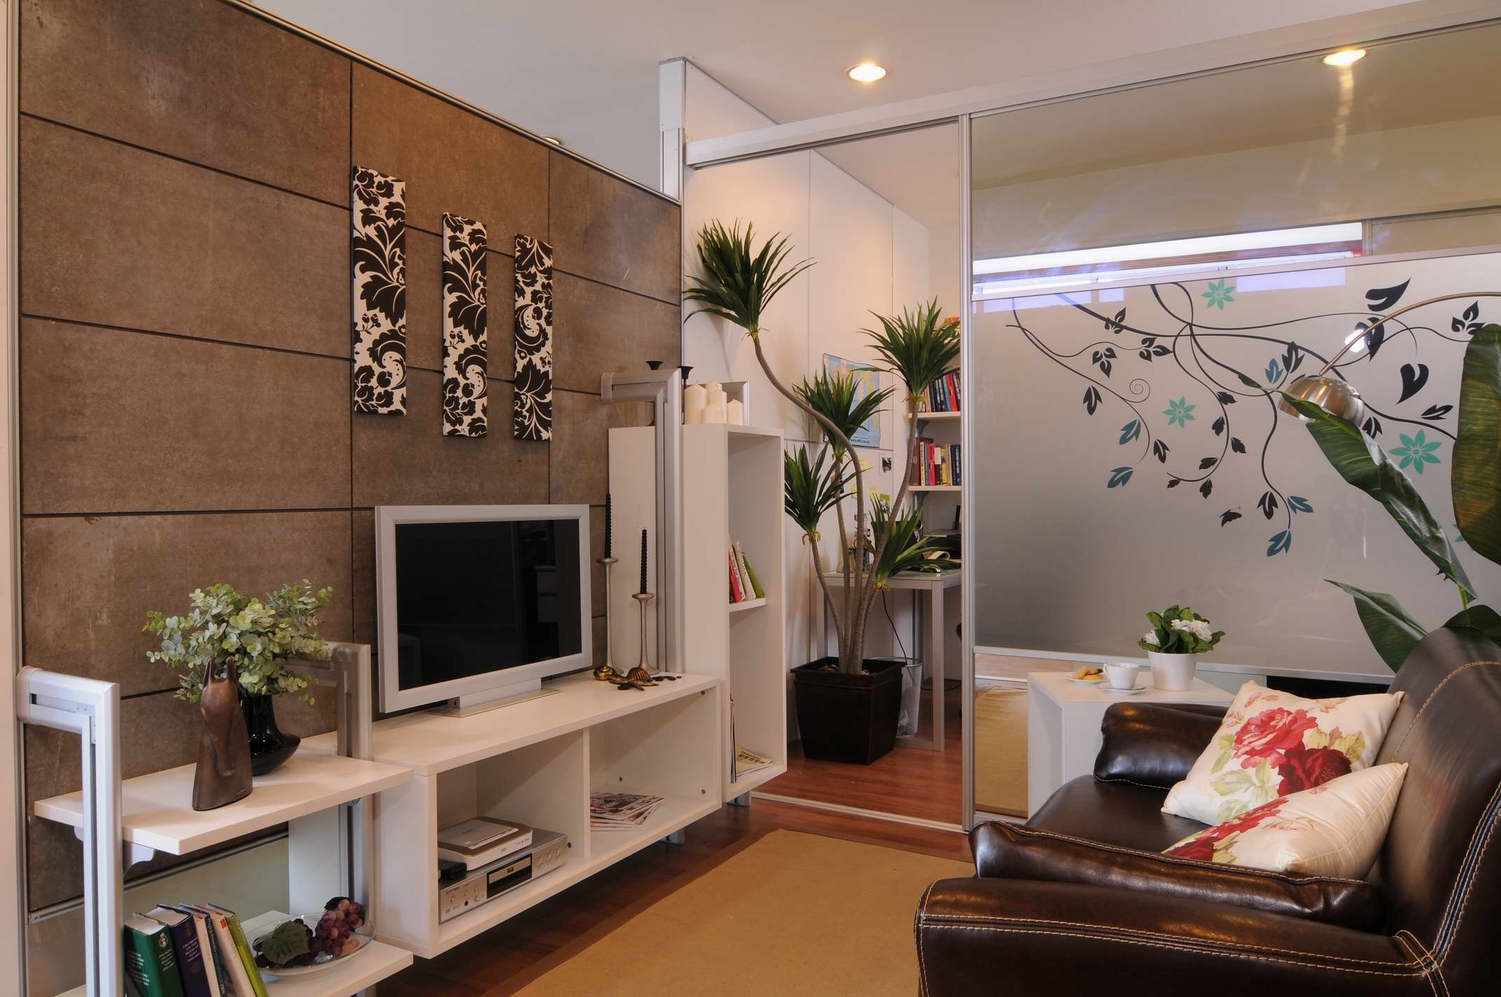 Wall Cabinet Design Living Room
 Lcd Wall Unit Design For Living Room Living Room Designs